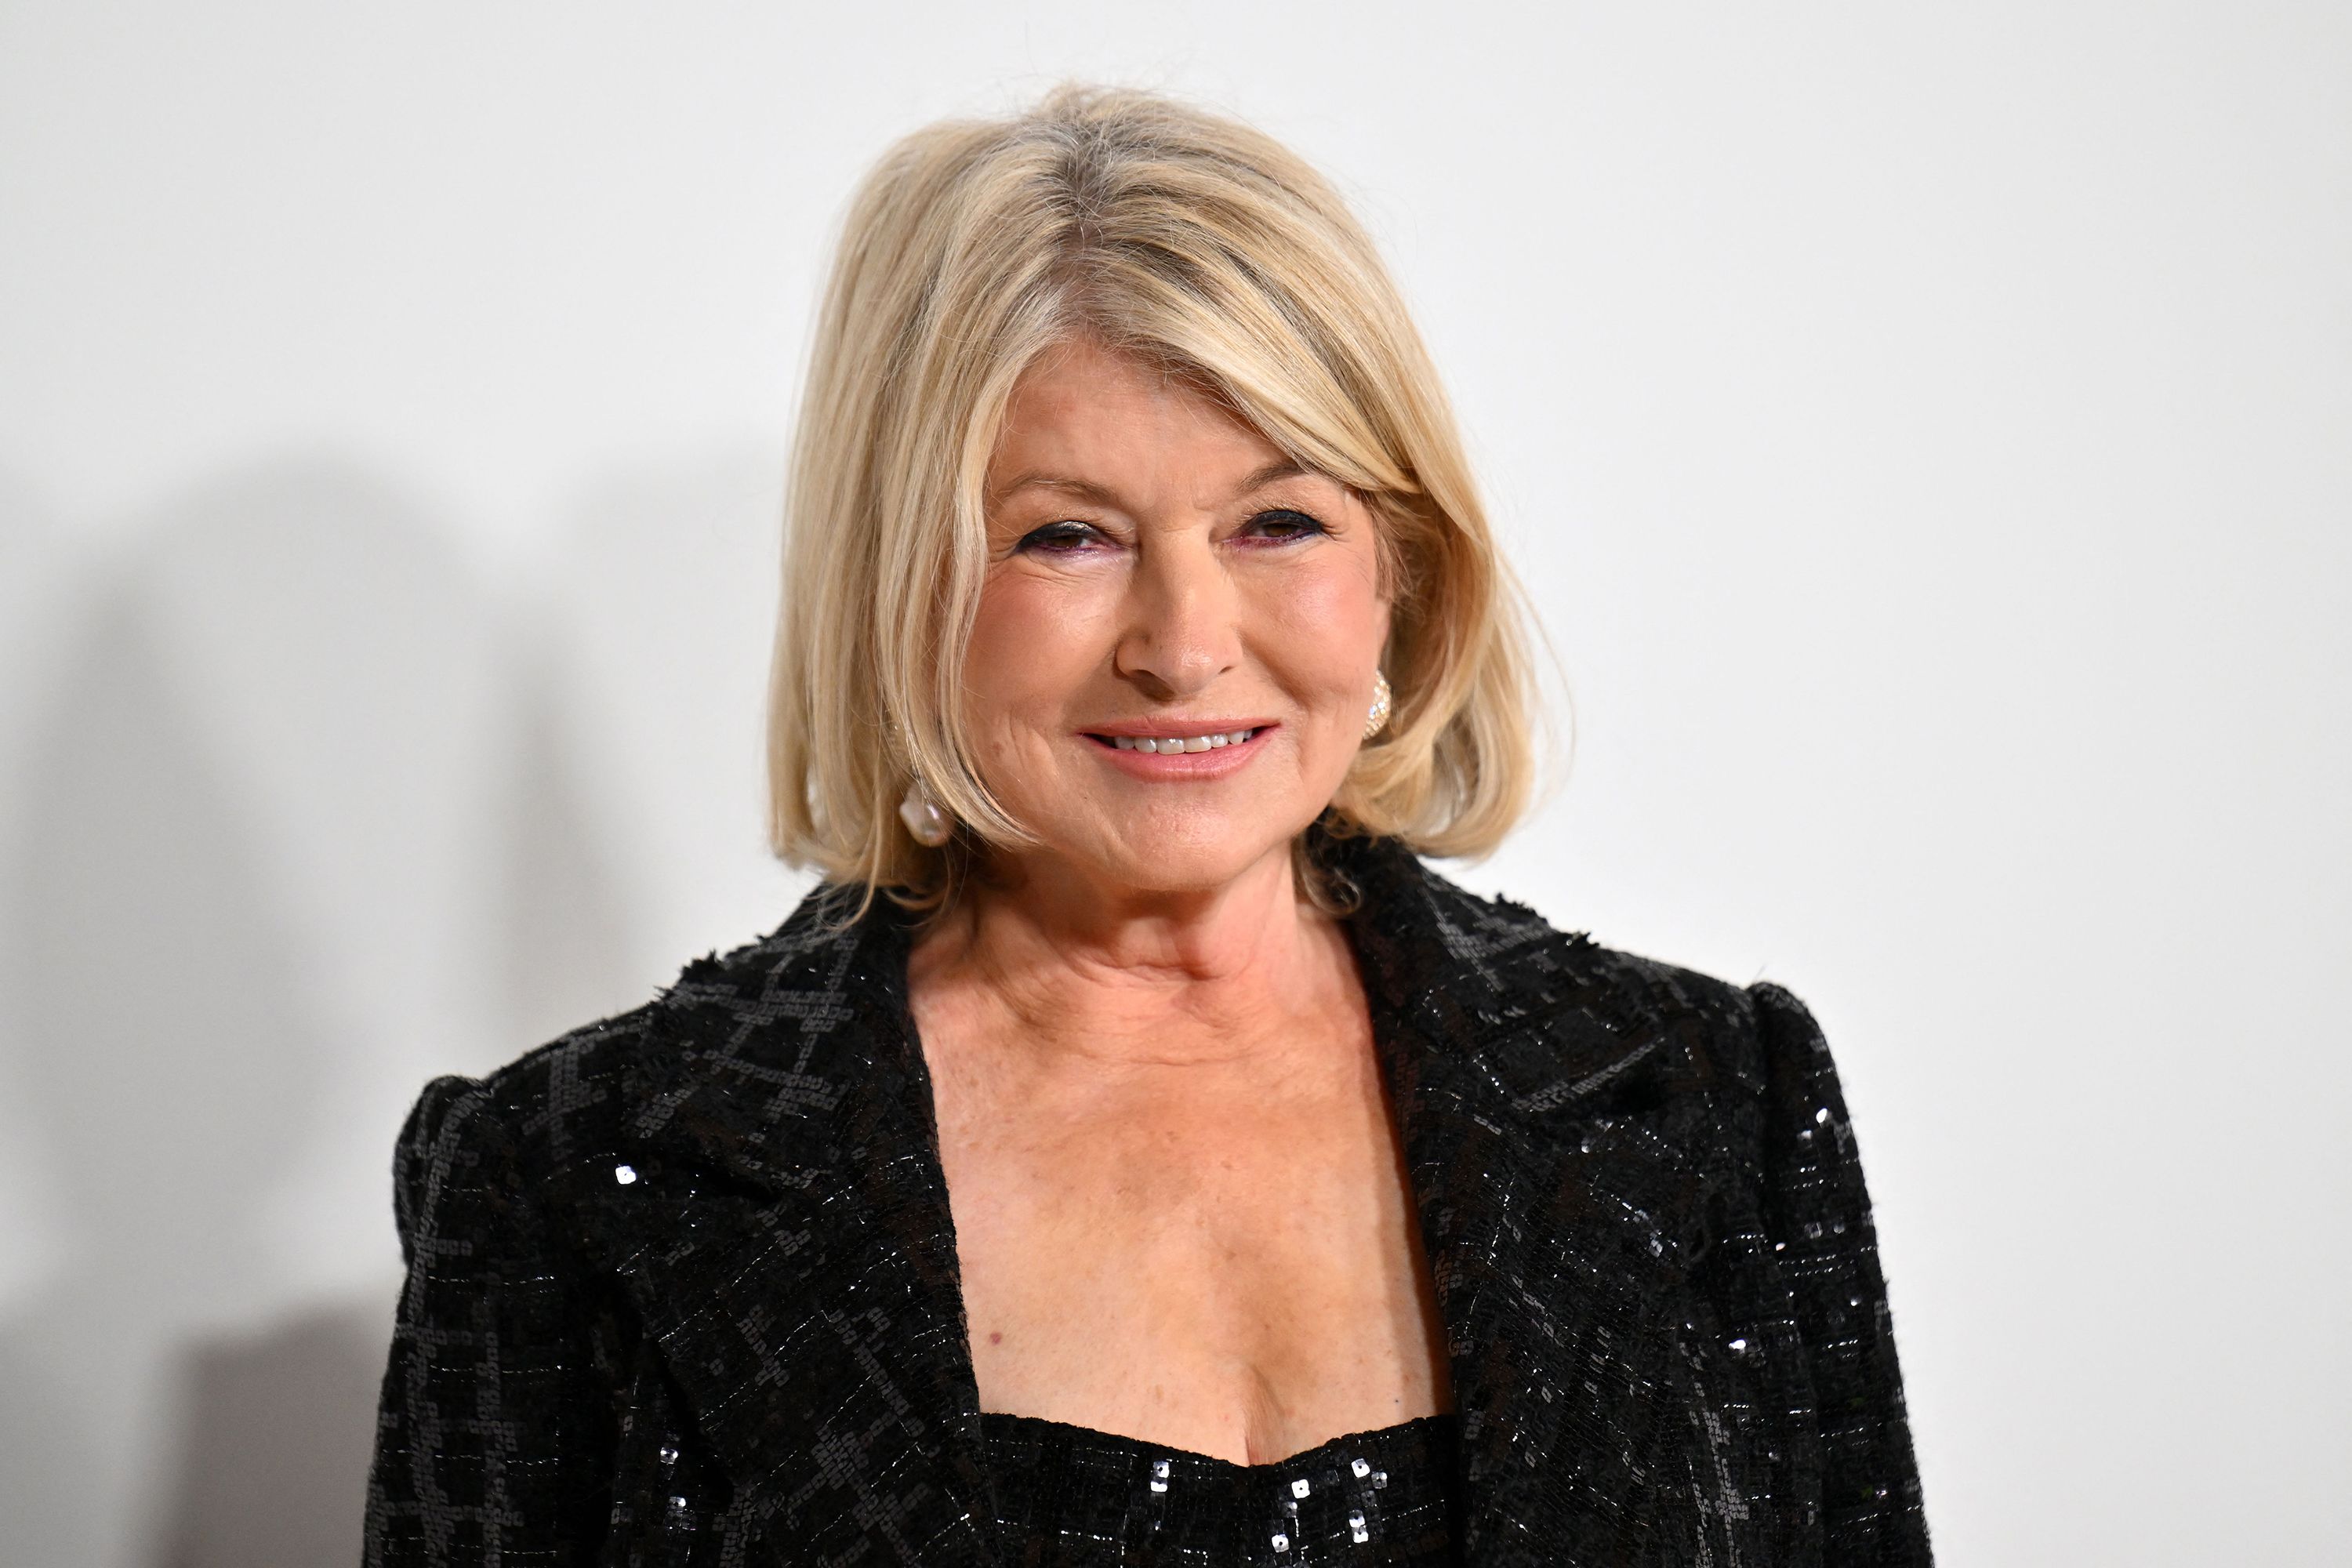 Historian: There is no celebrity chef like Martha Stewart